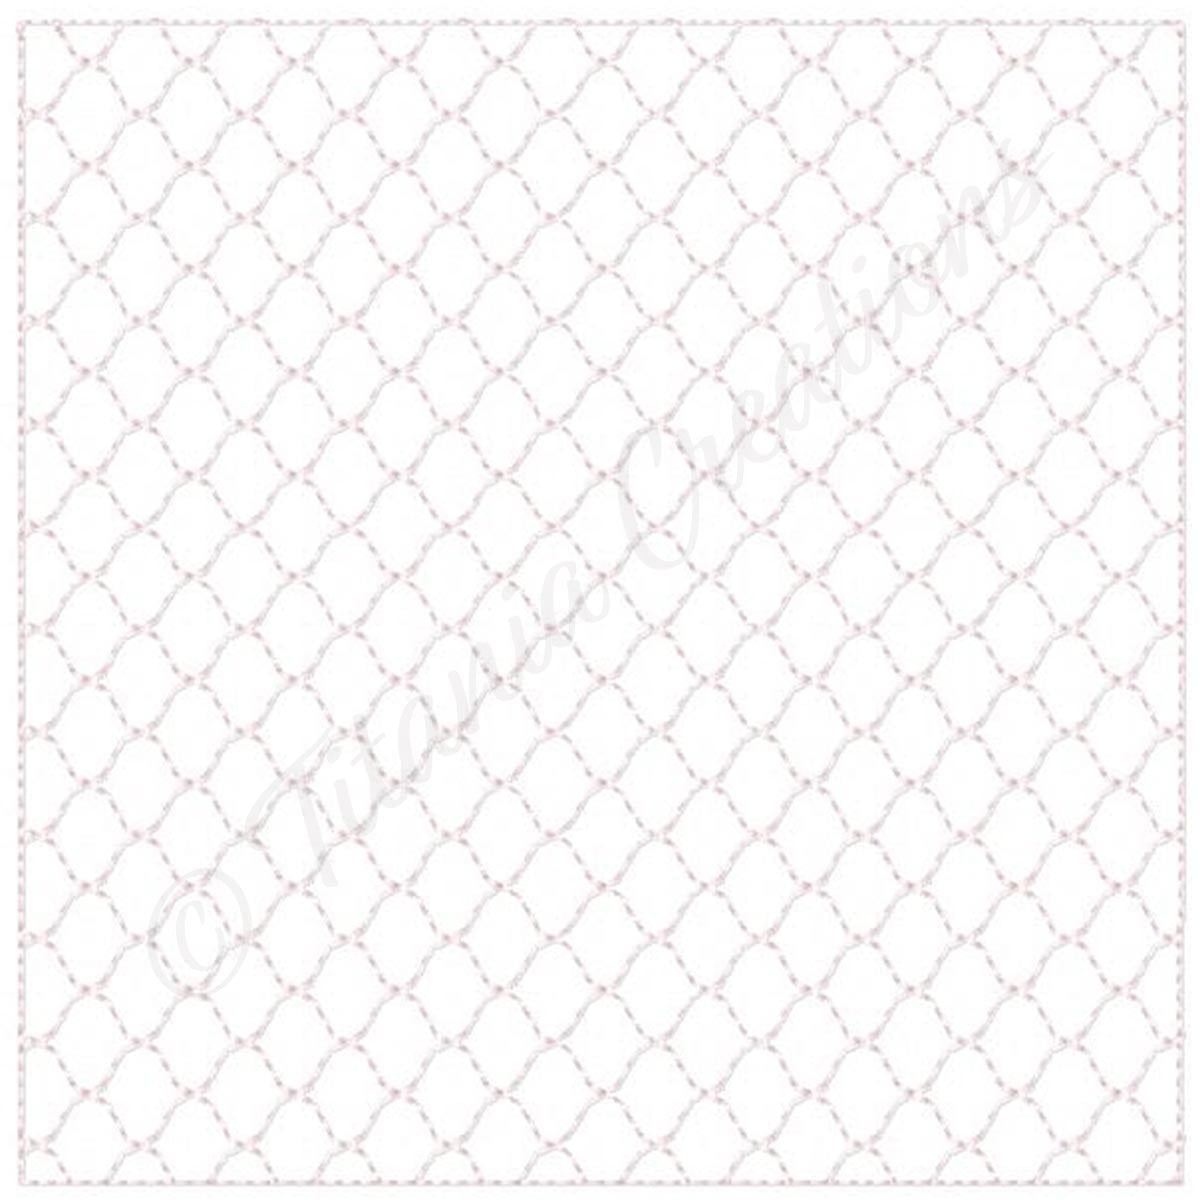 Mesh Quilt Blocks 9 Sizes Included